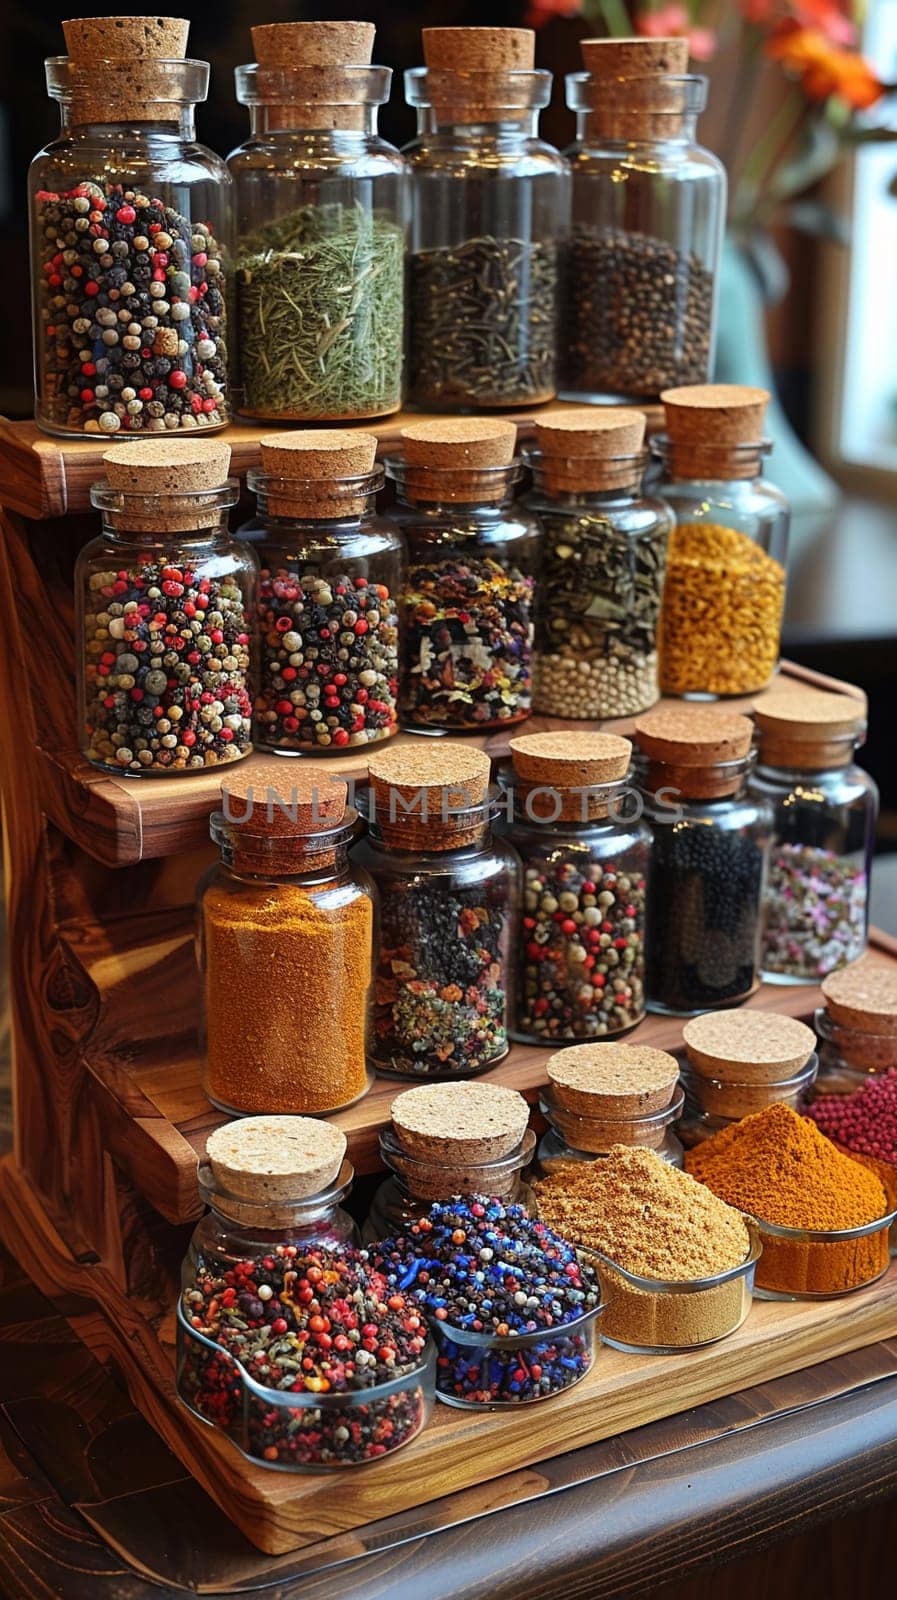 Spice Racks Enrich Recipes with Global Flavors in Business of Culinary Arts, Spice grinders and colorful powders spice up a narrative of zest and diversity in the culinary arts business.